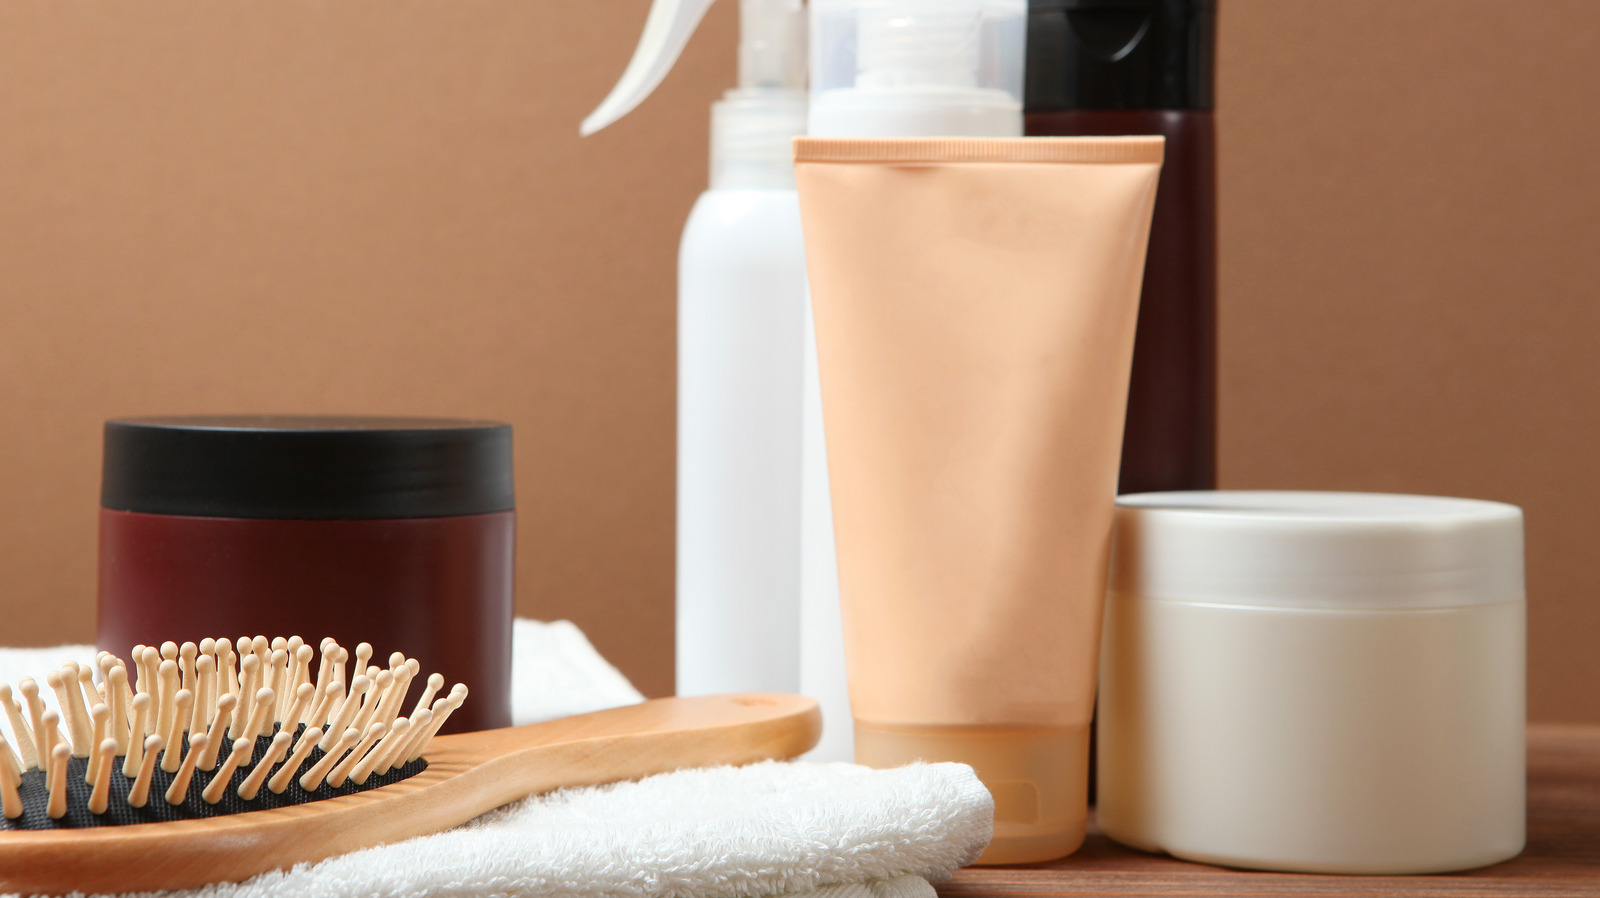 Ingredients You Should Avoid In Your Haircare Products